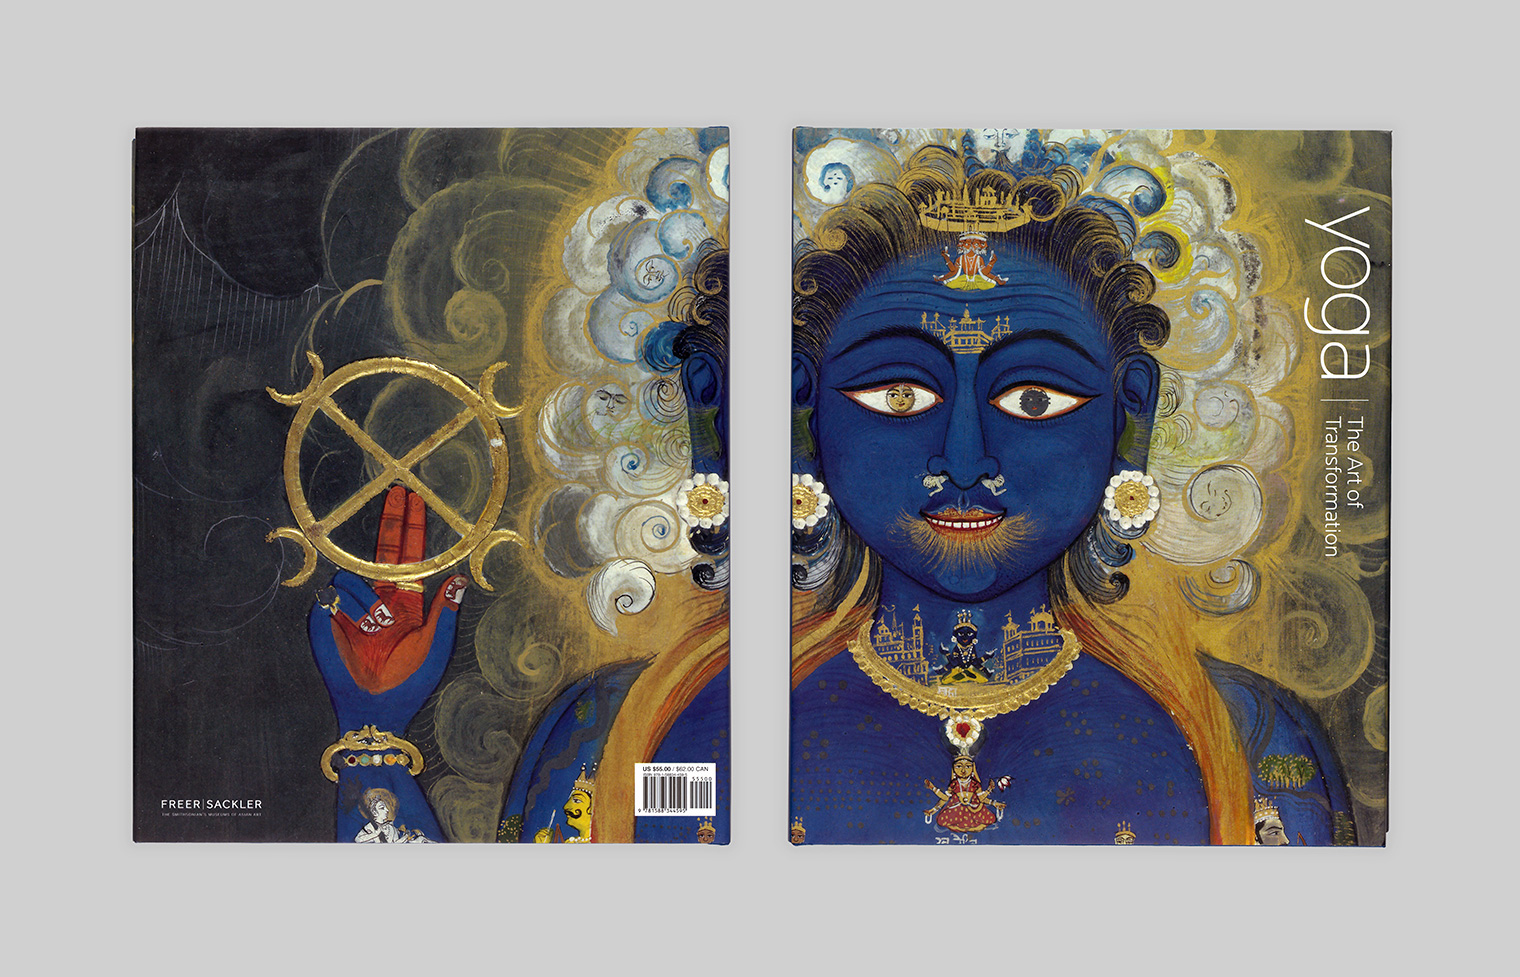 Front and back covers show a detail of the Hindu god Vishna Vishvarupa from India depicted in blue.